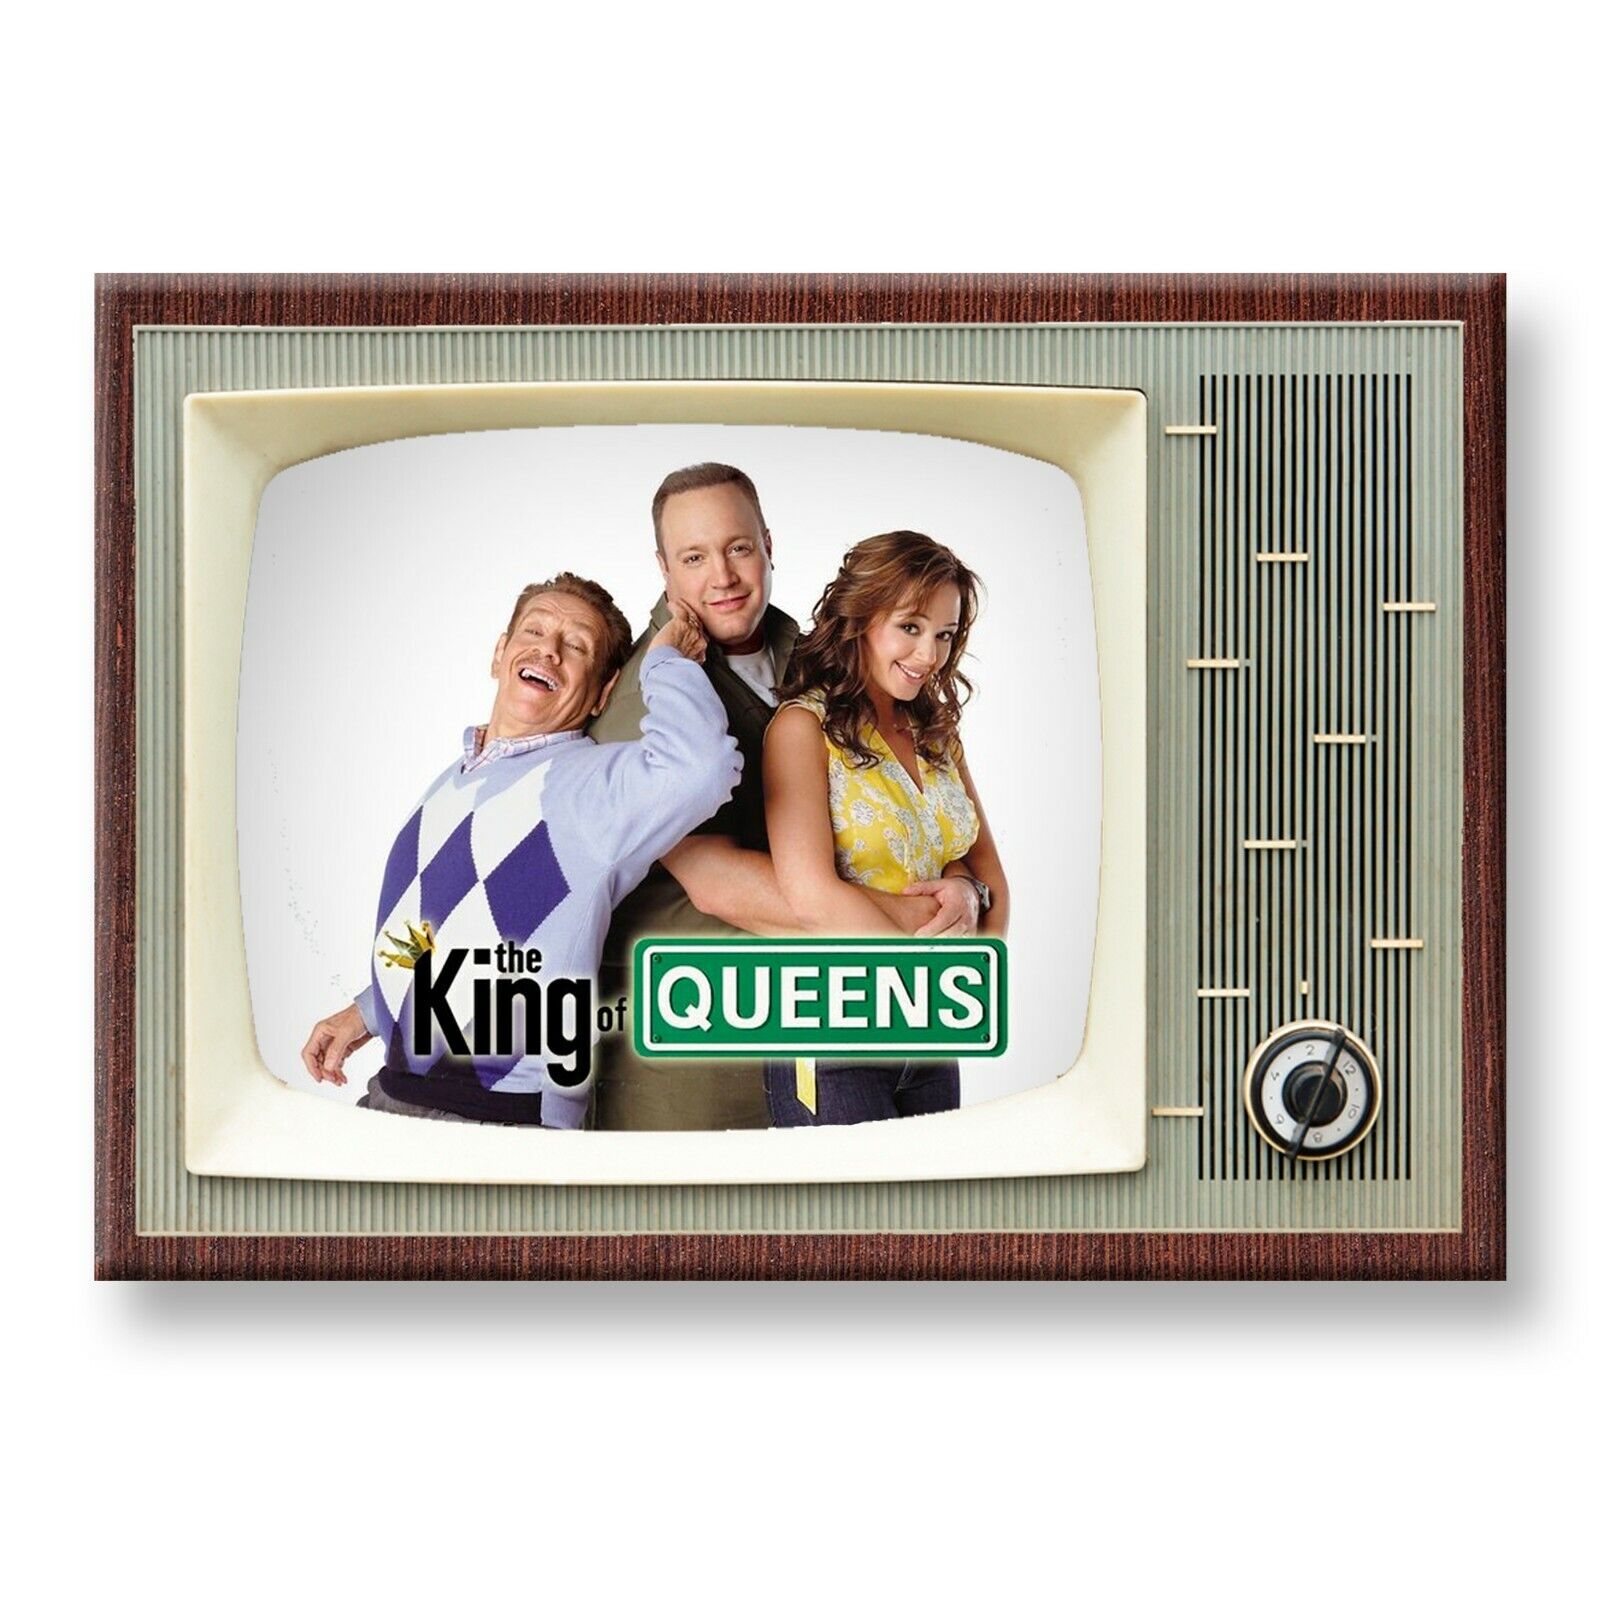 KING OF QUEENS TV Show Classic TV 3.5 inches x 2.5 inches FRIDGE MAGNET